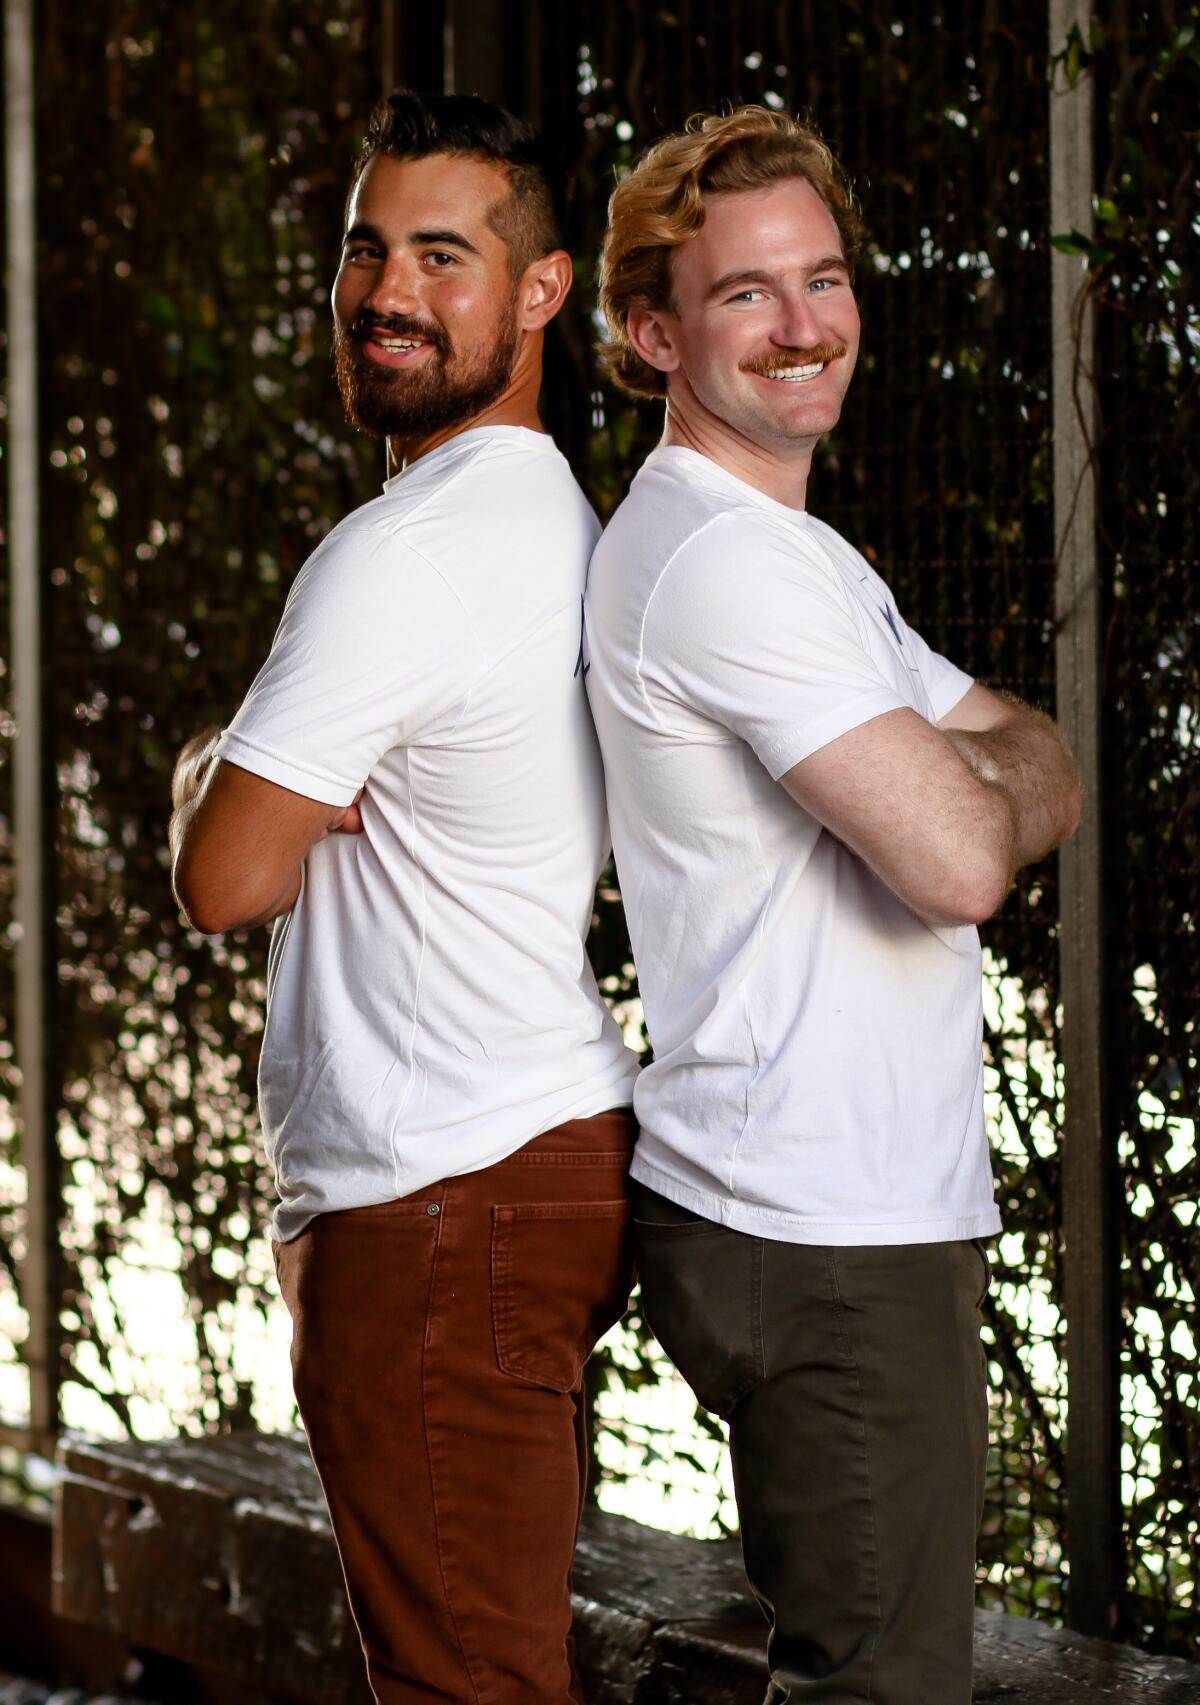 Aaron Ruzinsky and Steve Sykes believe being in business together is “a natural evolution of [our] lifelong friendship.”